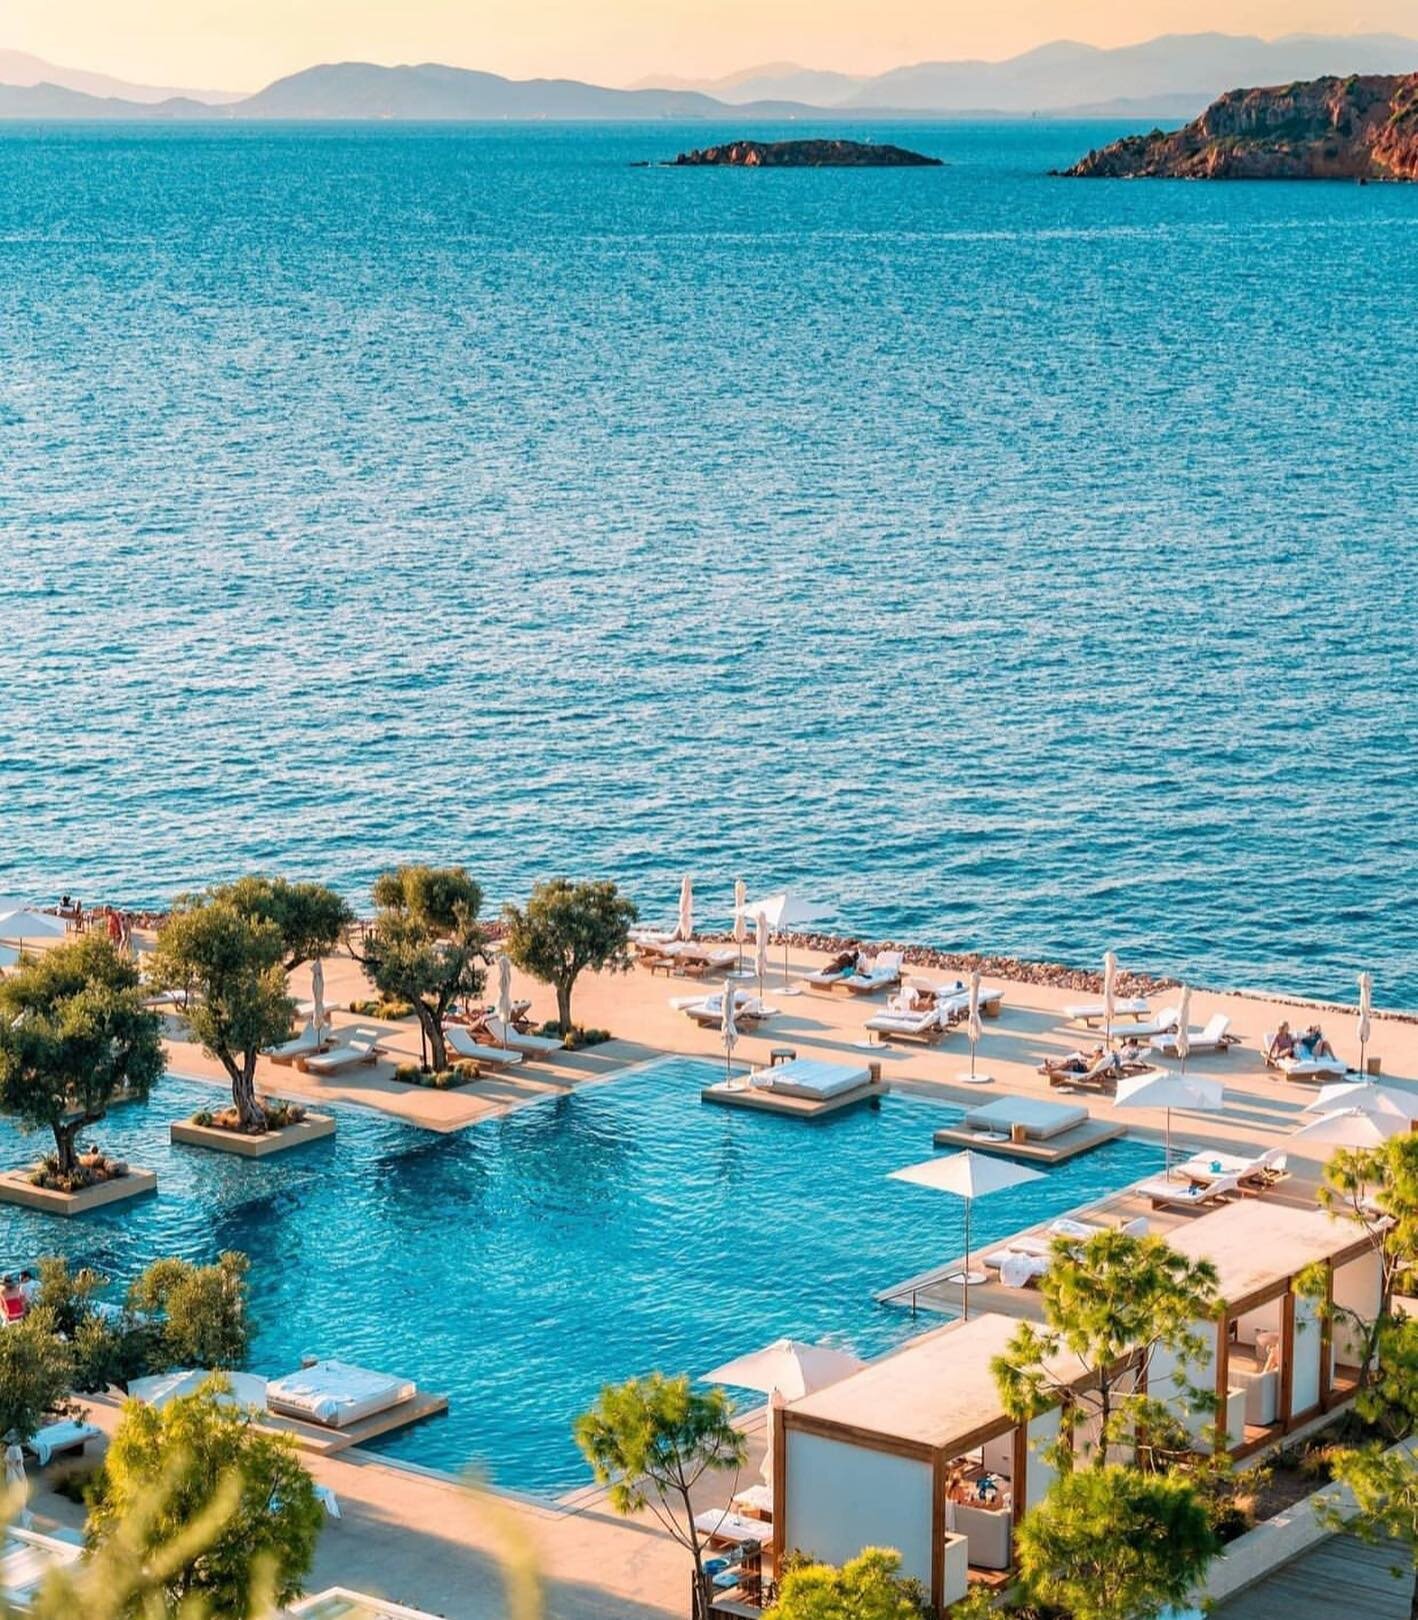 Paradise Found
Four Seasons Astir Palace making the strong argument to stay a week in Athens

#itsbeautifulhere #athensdream #fsathens #ultimatelayoverhotel #luxuryresort